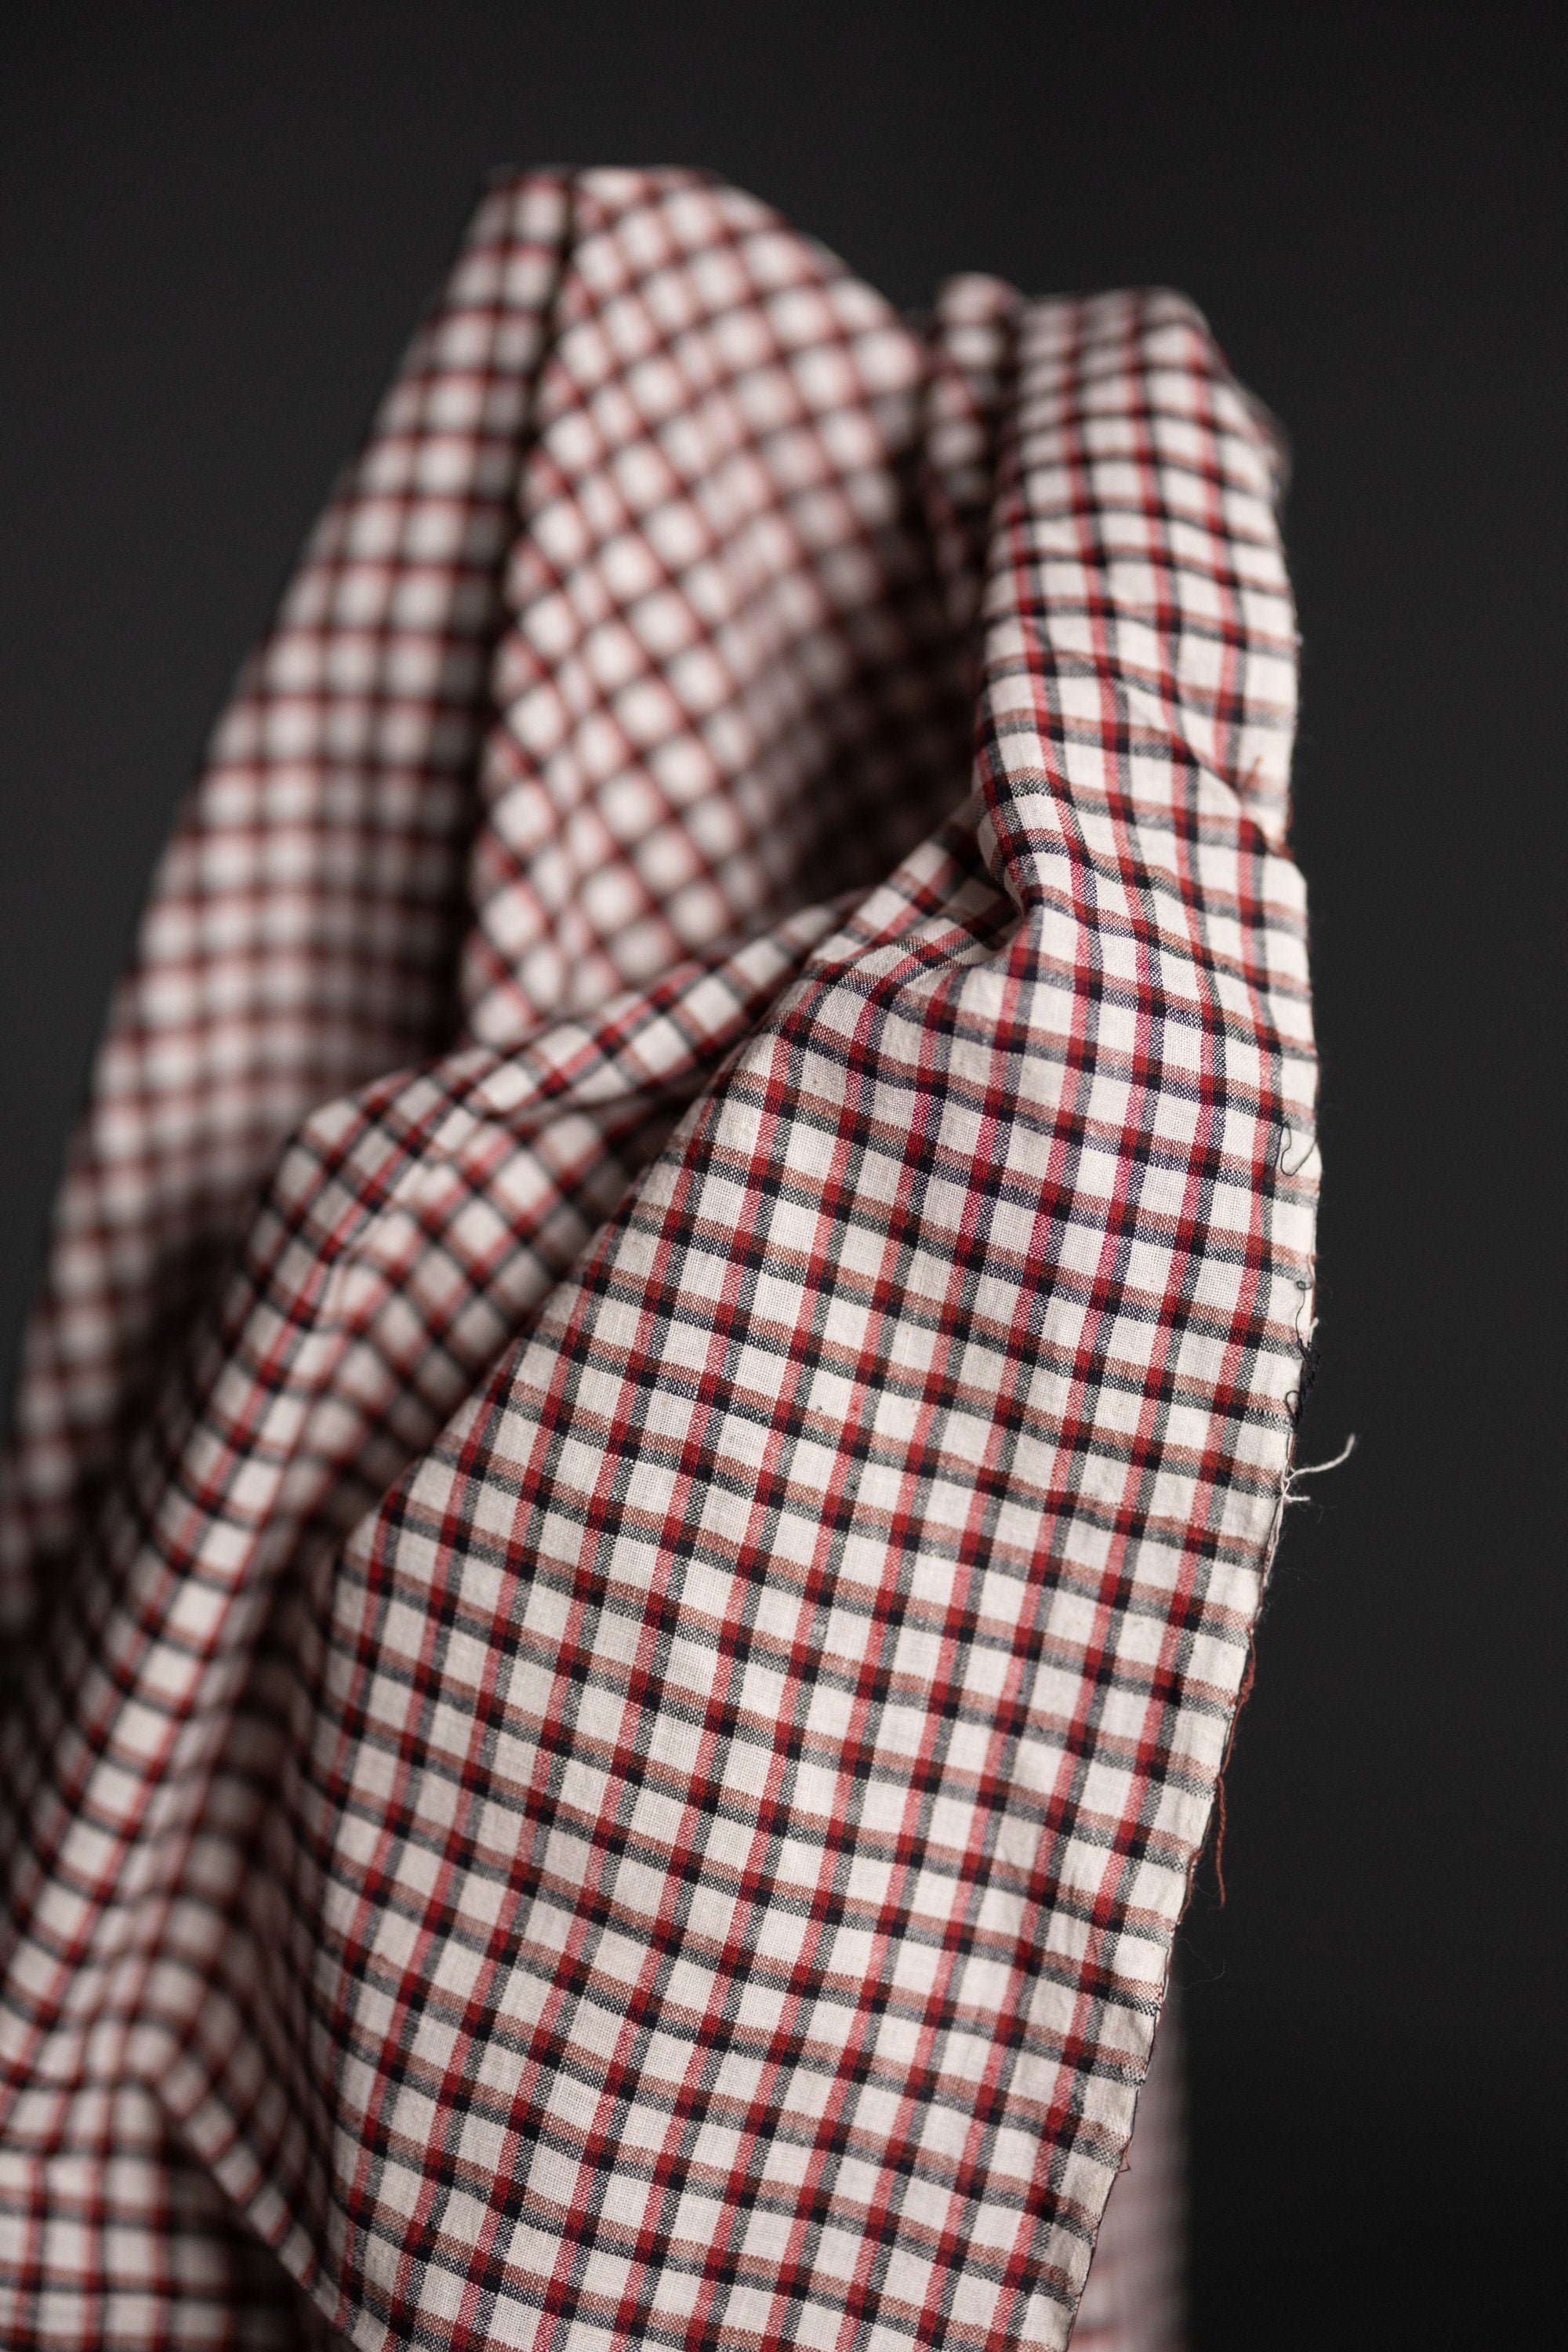 Gingham Cotton Hanky, Wine Red Cotton Hanky with Gingham Check